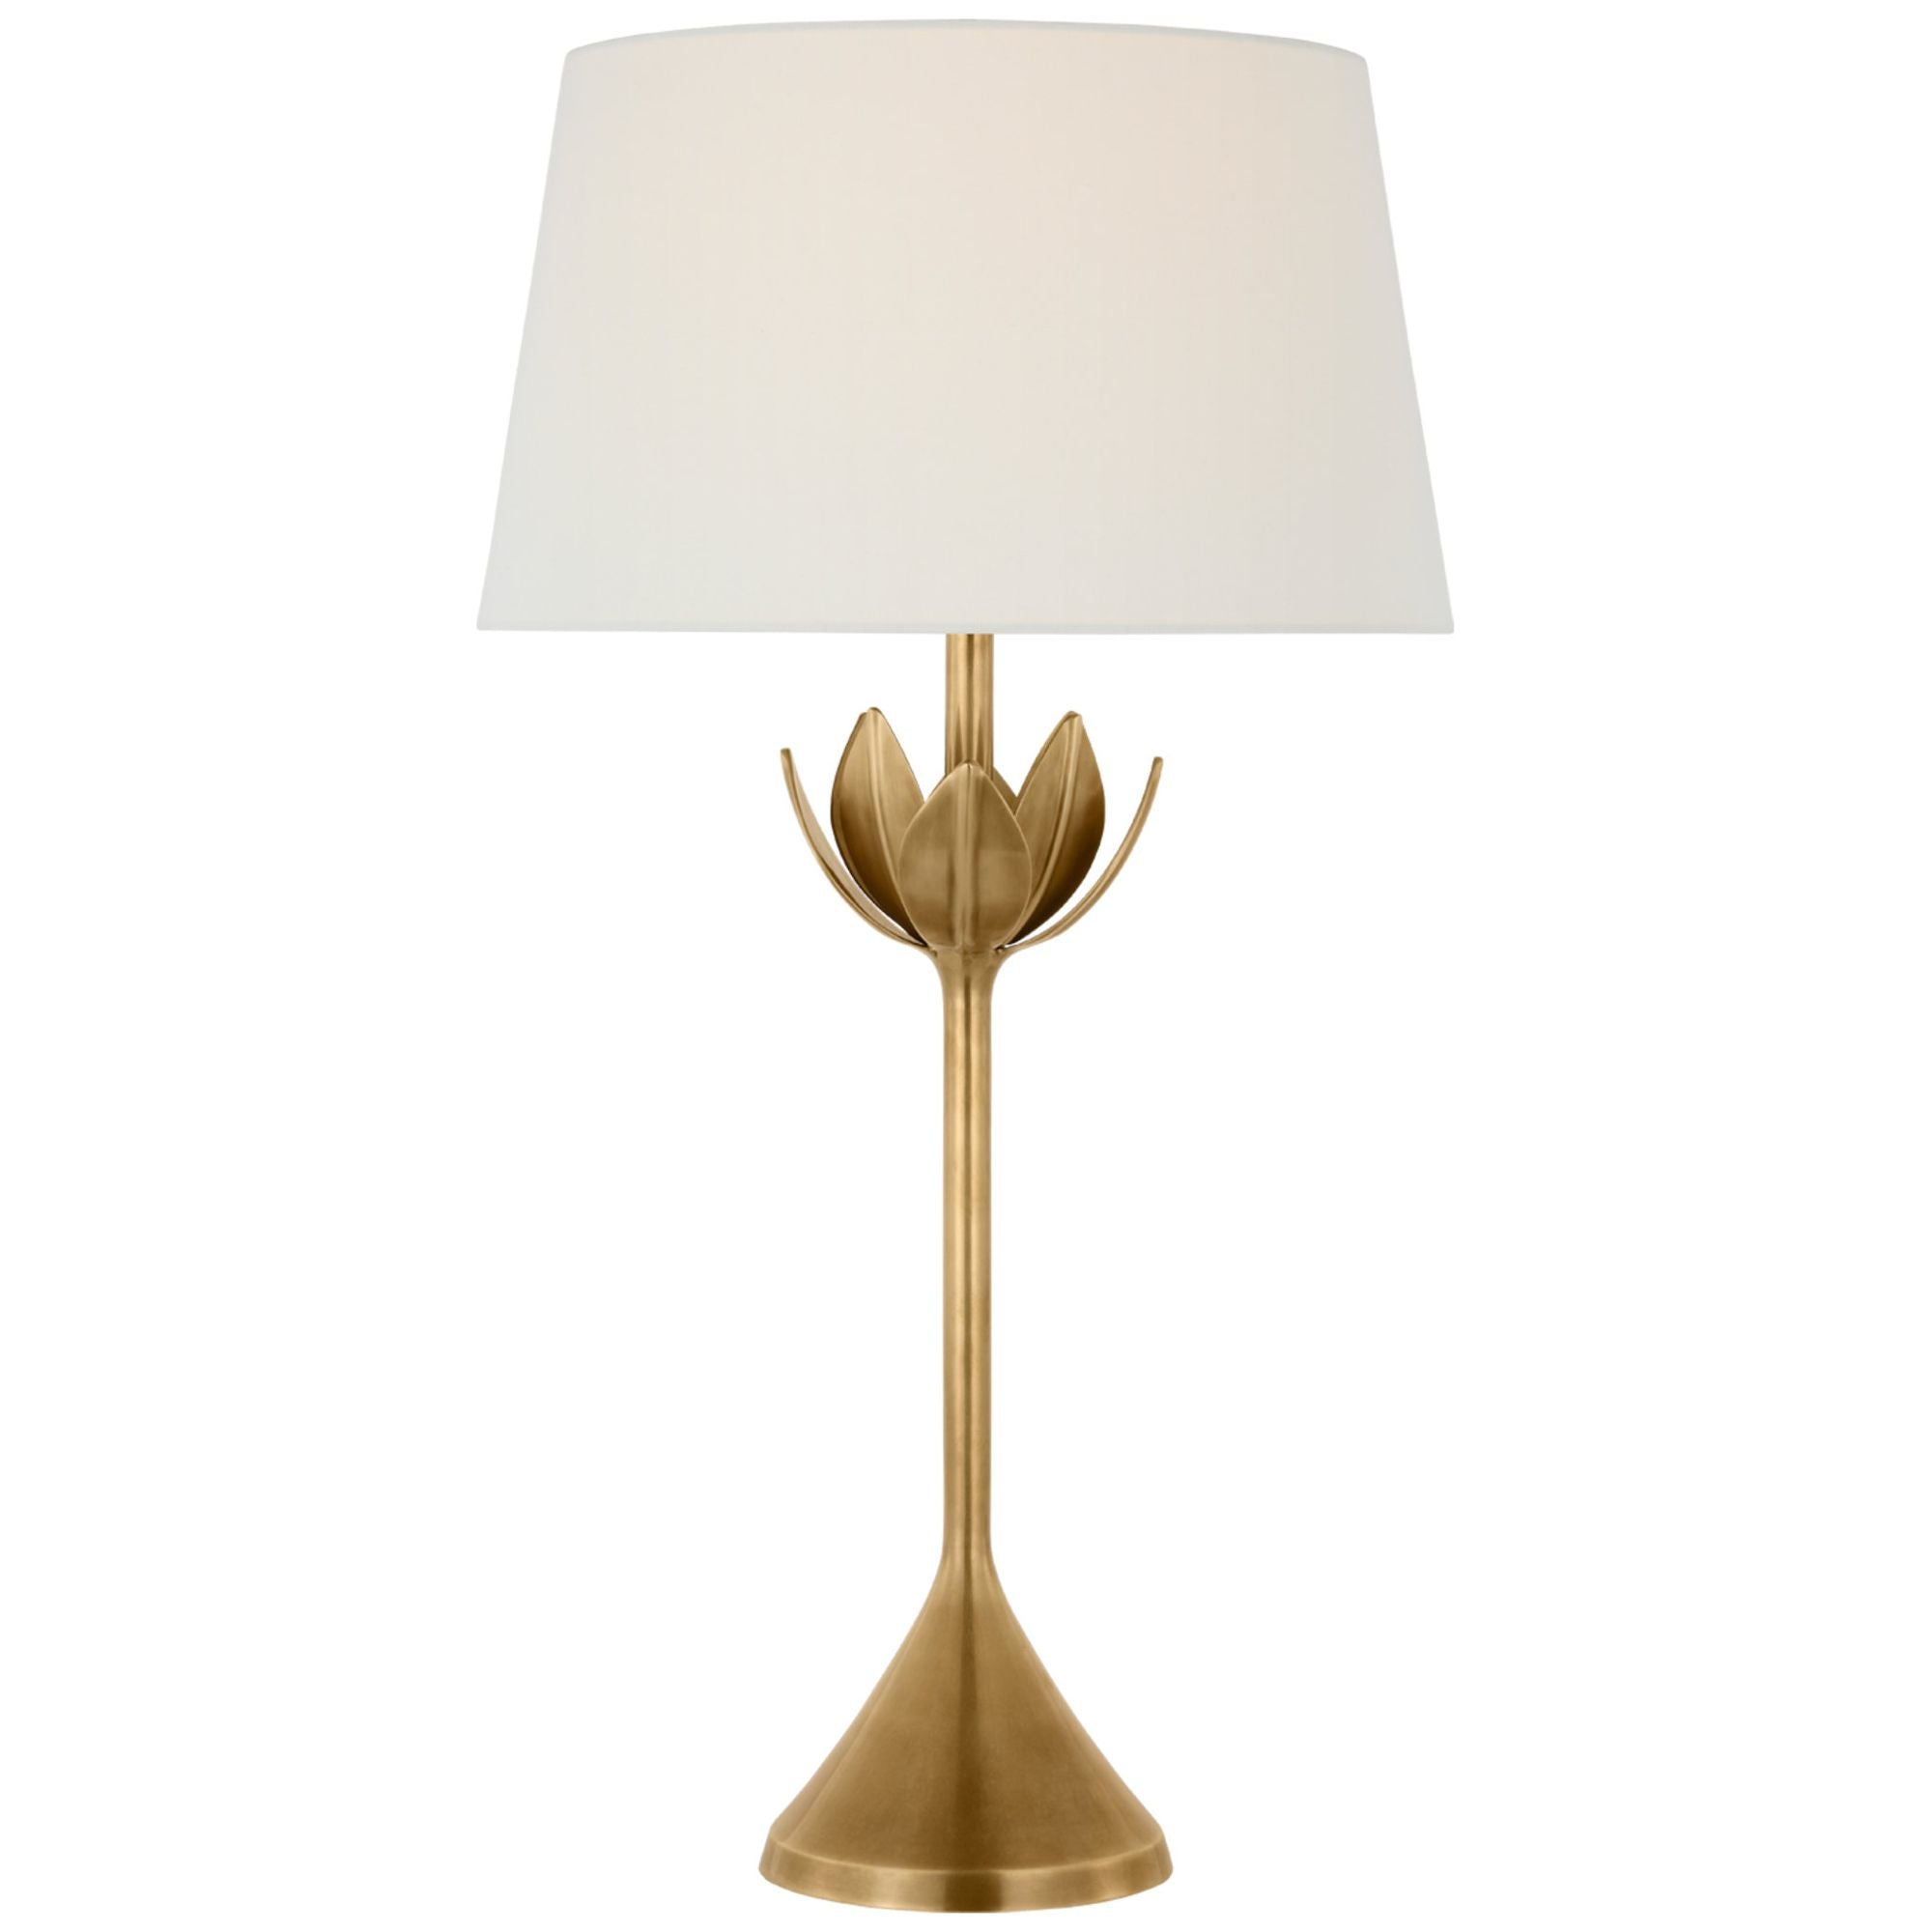 Julie Neill Alberto Large Table Lamp in Antique-Burnished Brass with Linen Shade